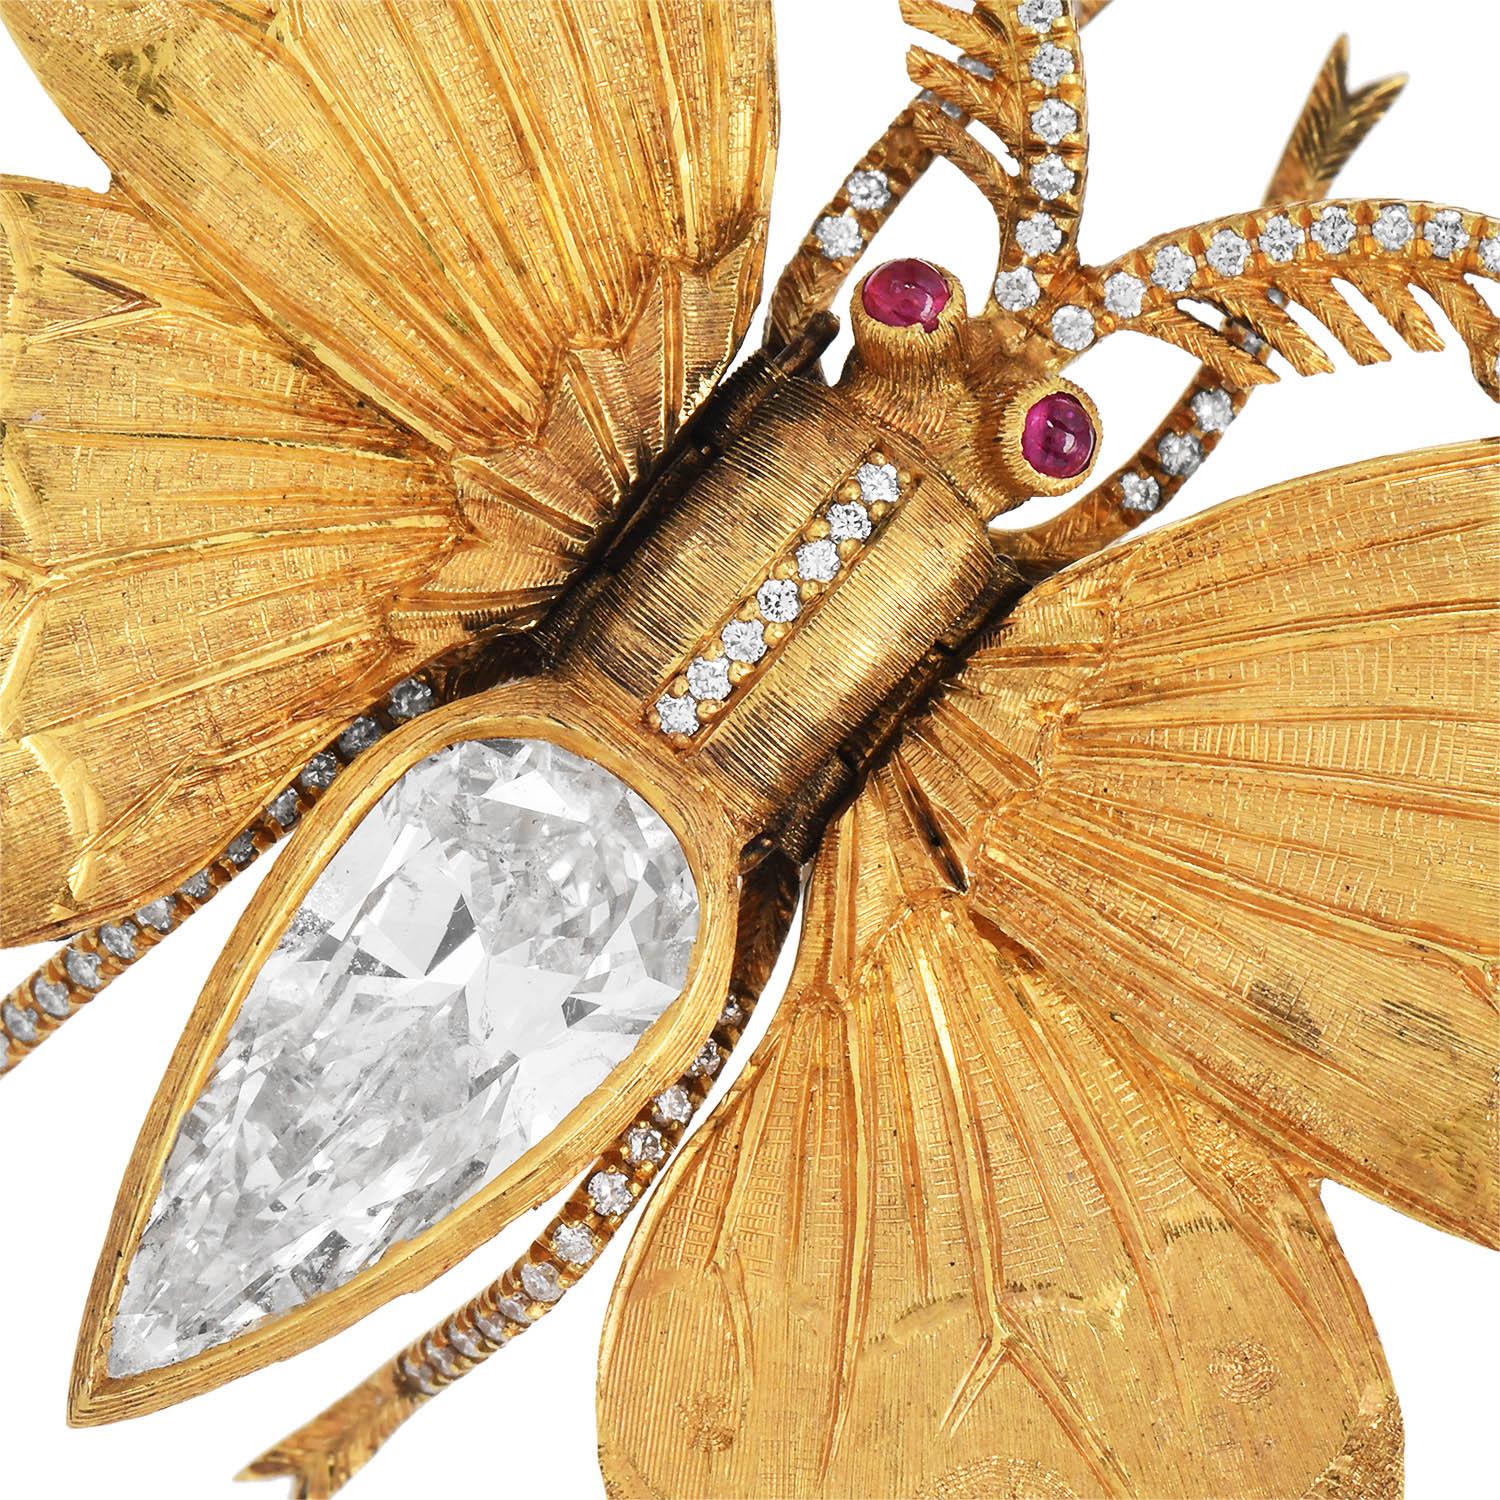 Mario Buccellati Diamond Ruby Butterfly Brooch Pin

Presenting a collectible Butterfly brooch by Buccellati with a Natural elongated Pear Diamond and Ruby Eyes Created by Mario Buccellati. 

Natural Round Diamond decorated on the wings legs